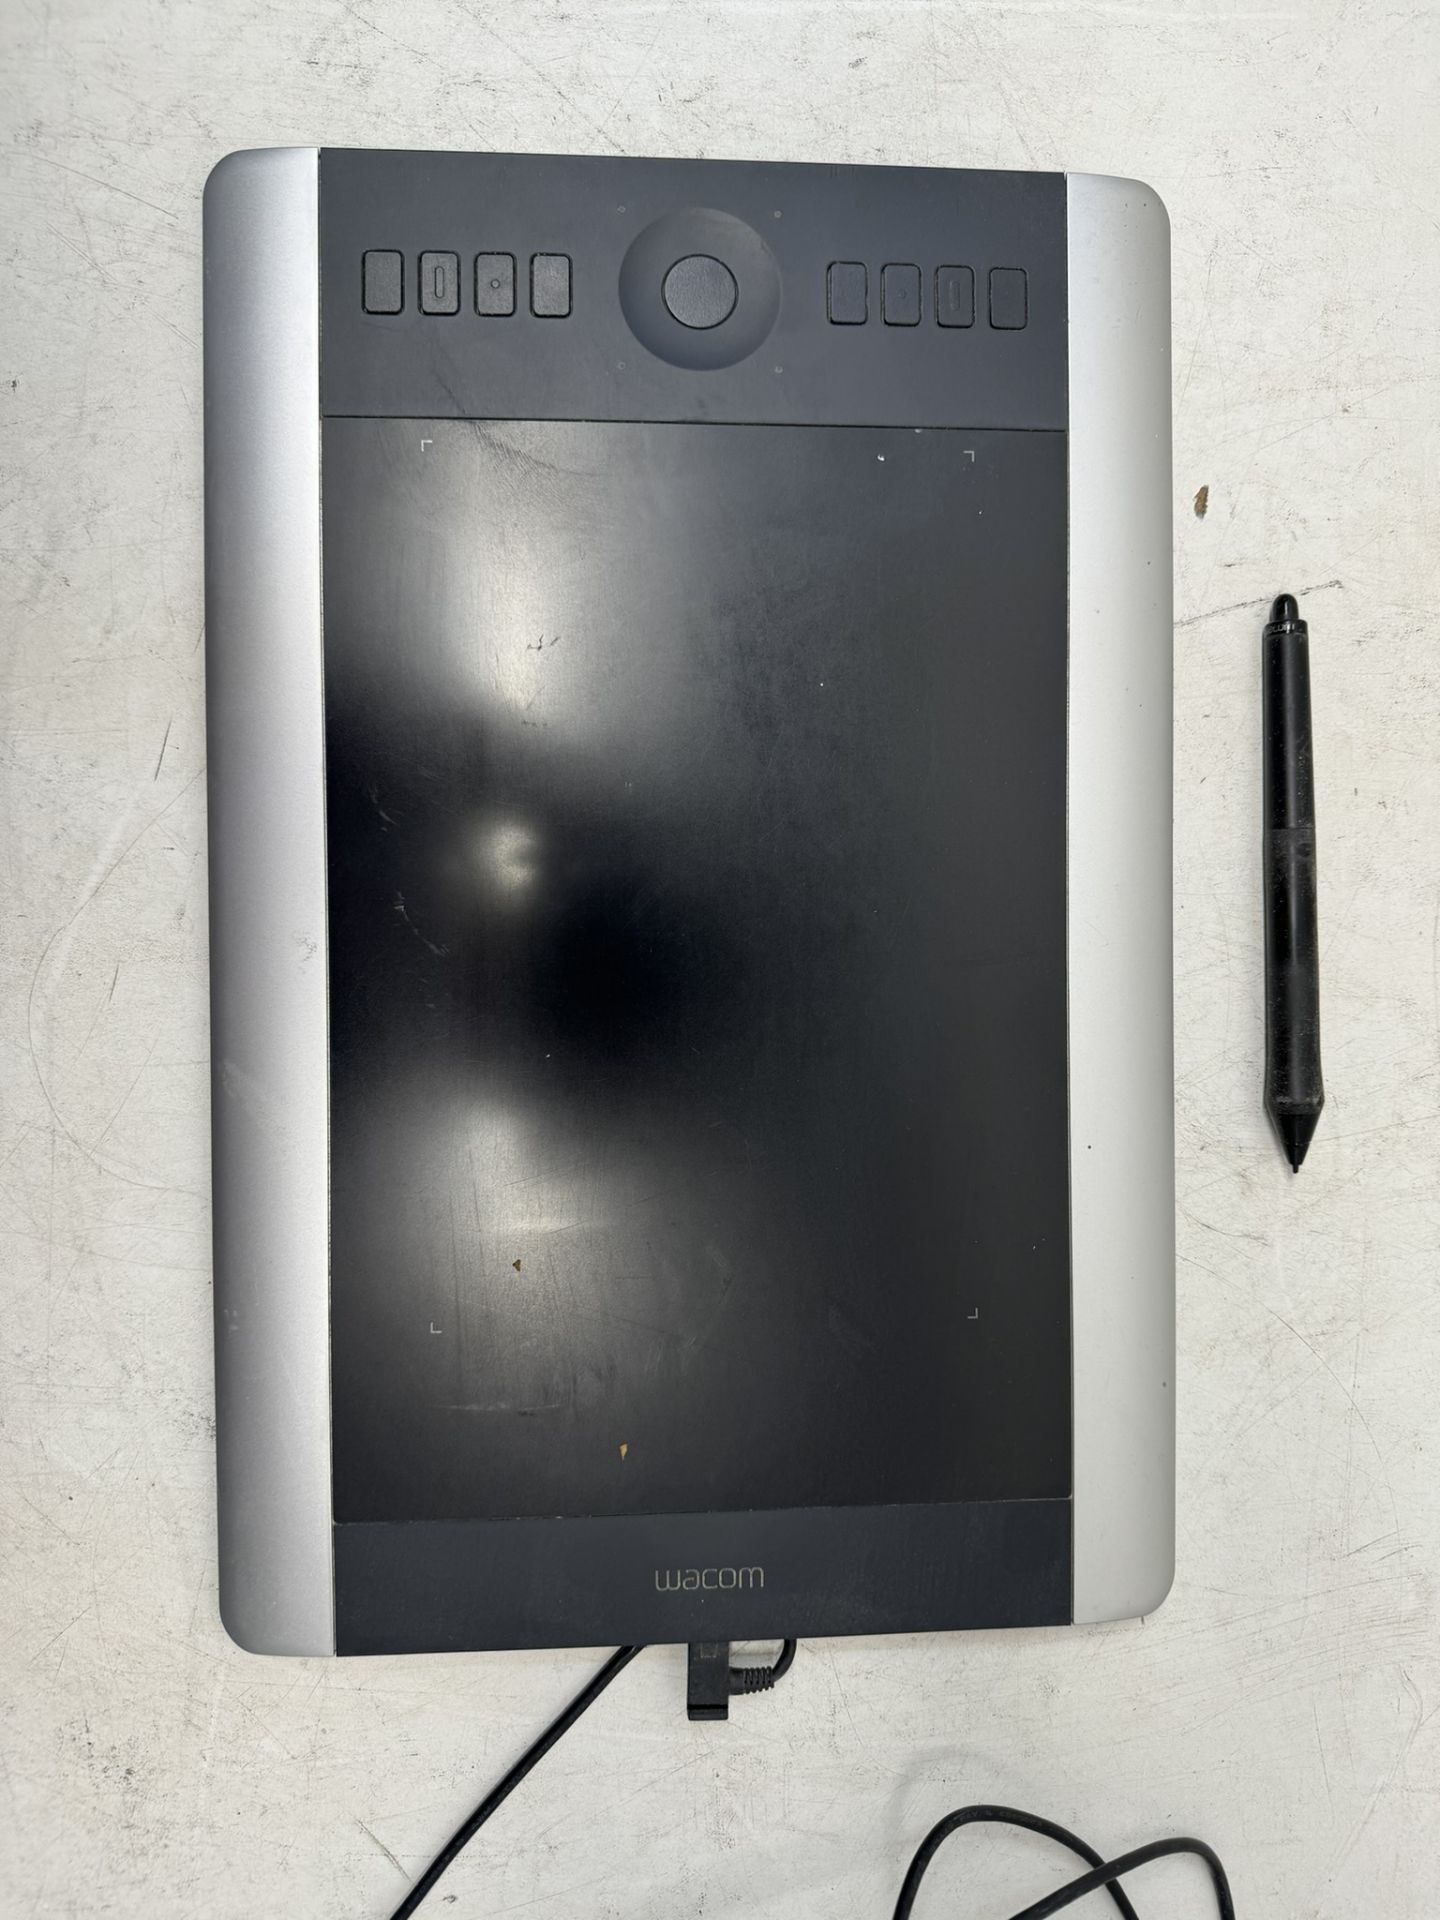 Wacom PTH-651 Intuos Pro Graphics Tablet With Pen